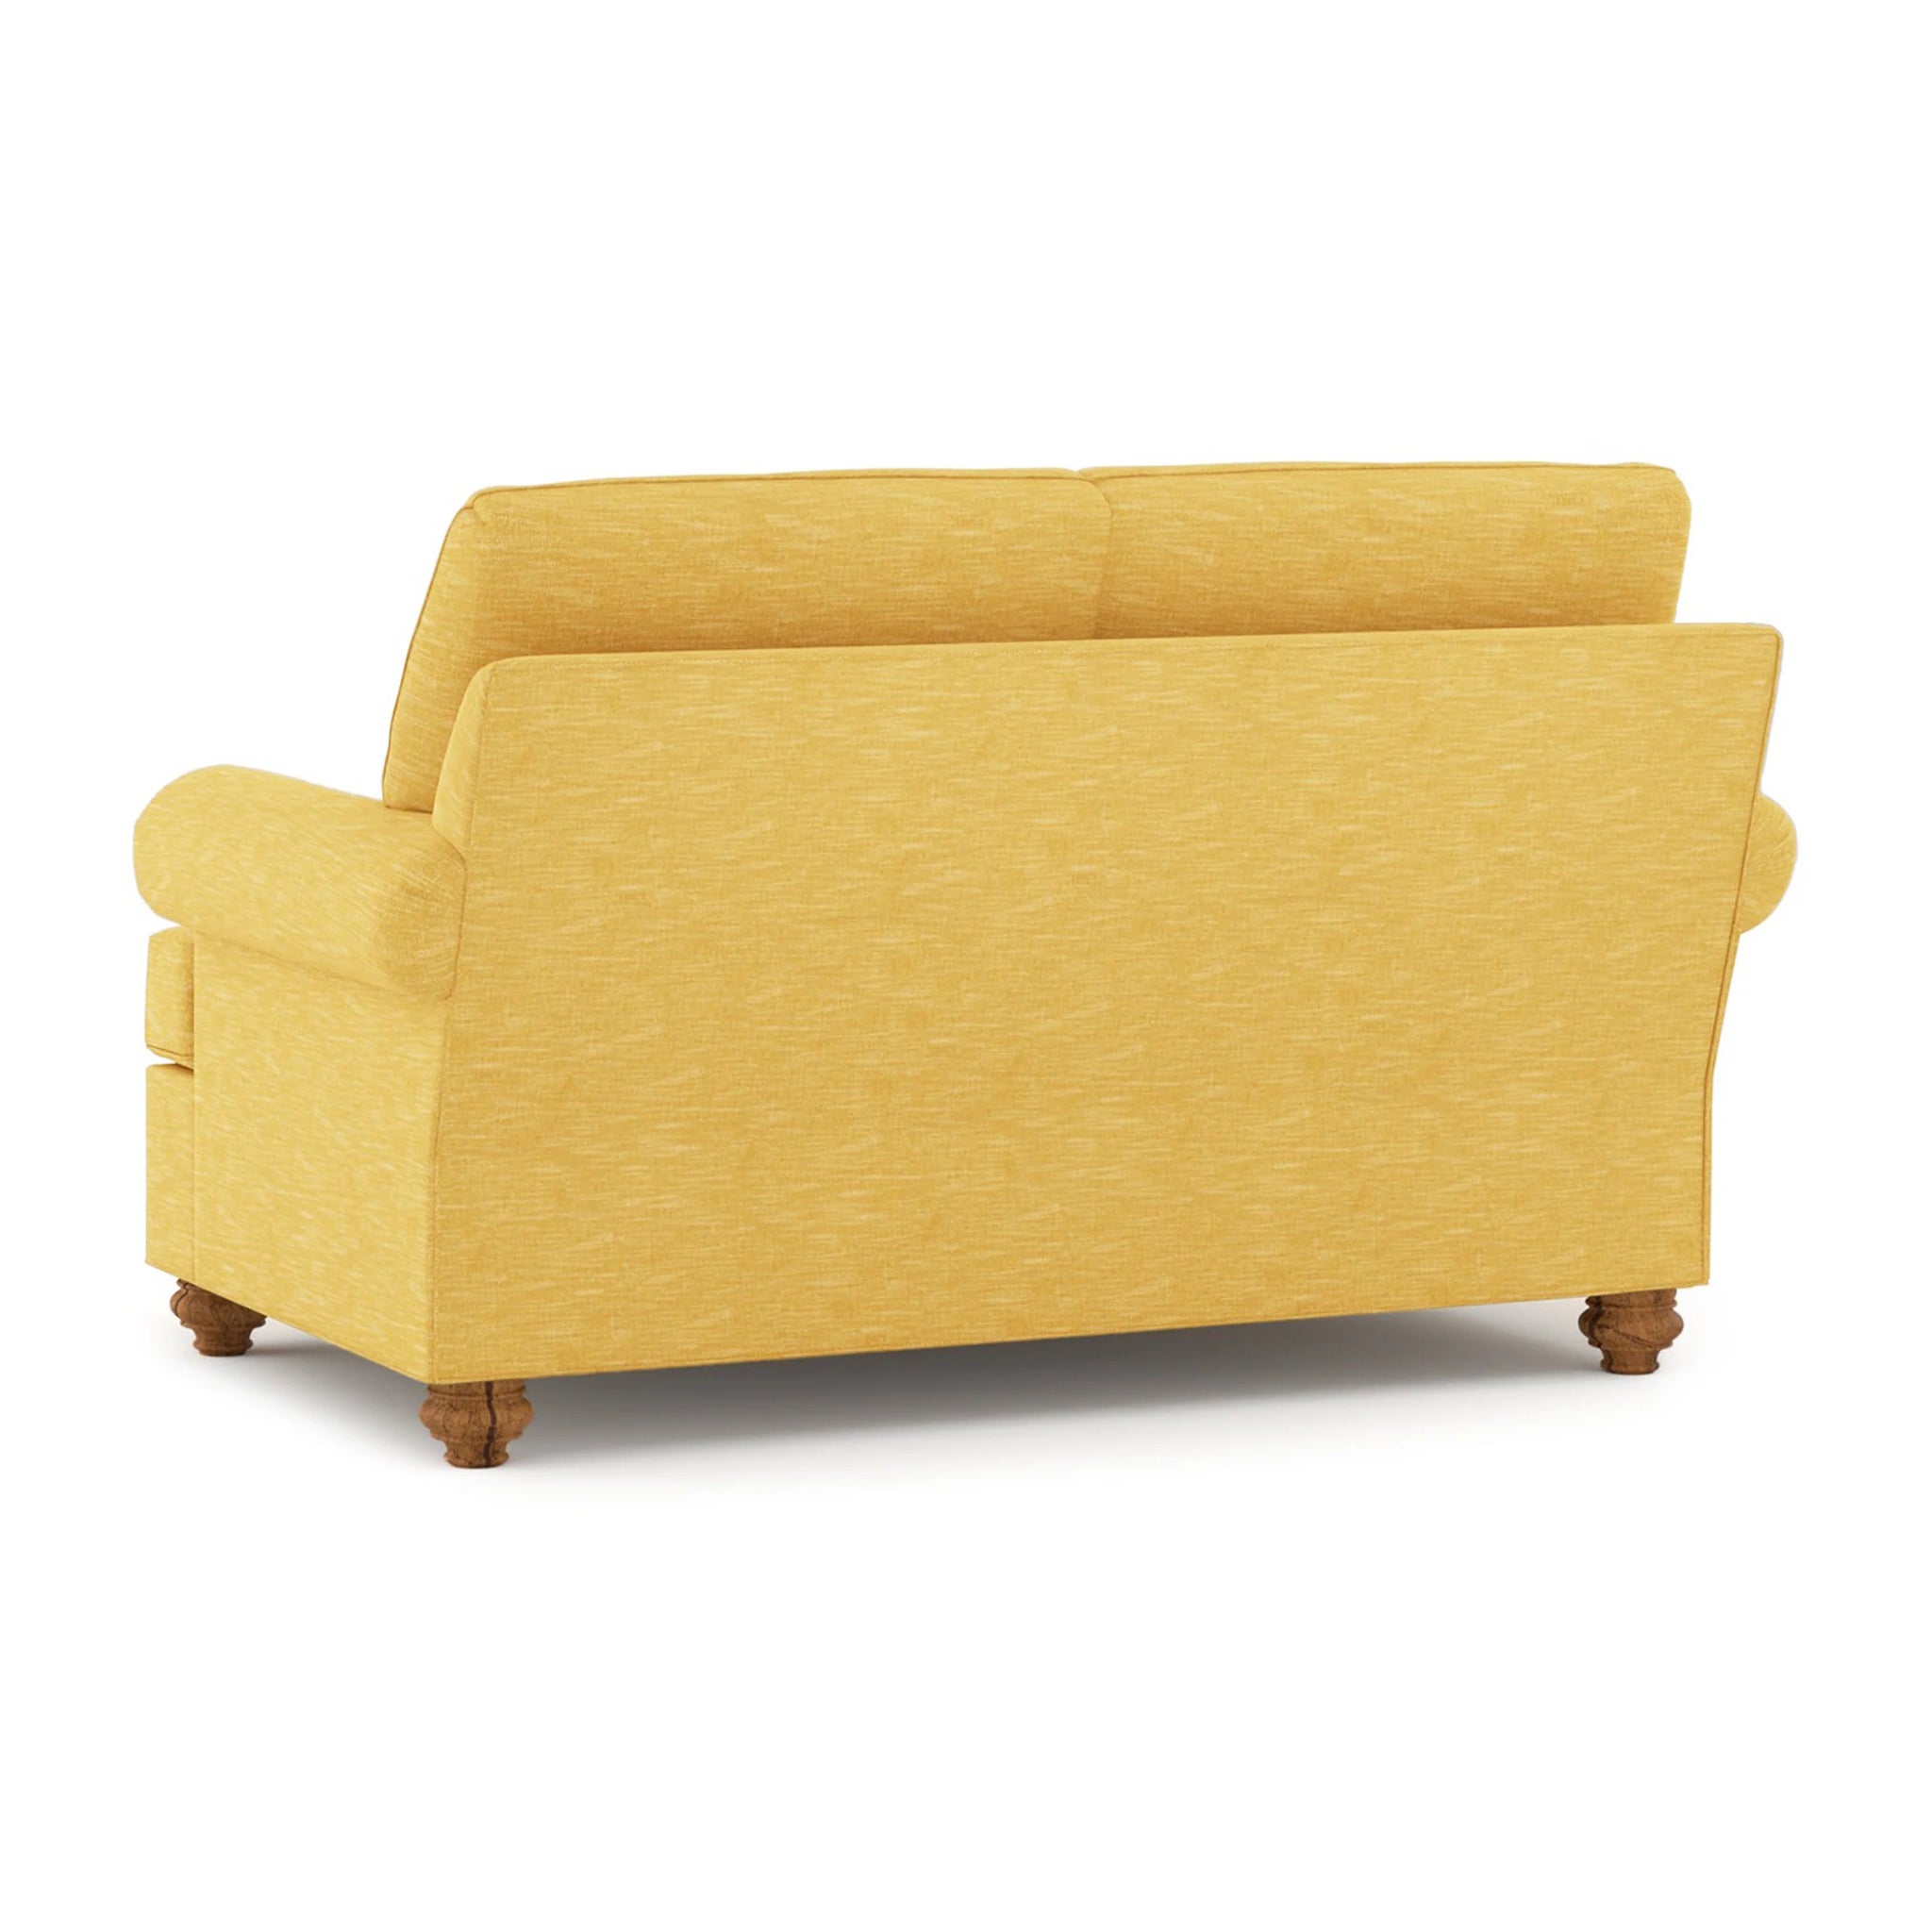 Woburn Manor Collection - Loveseat